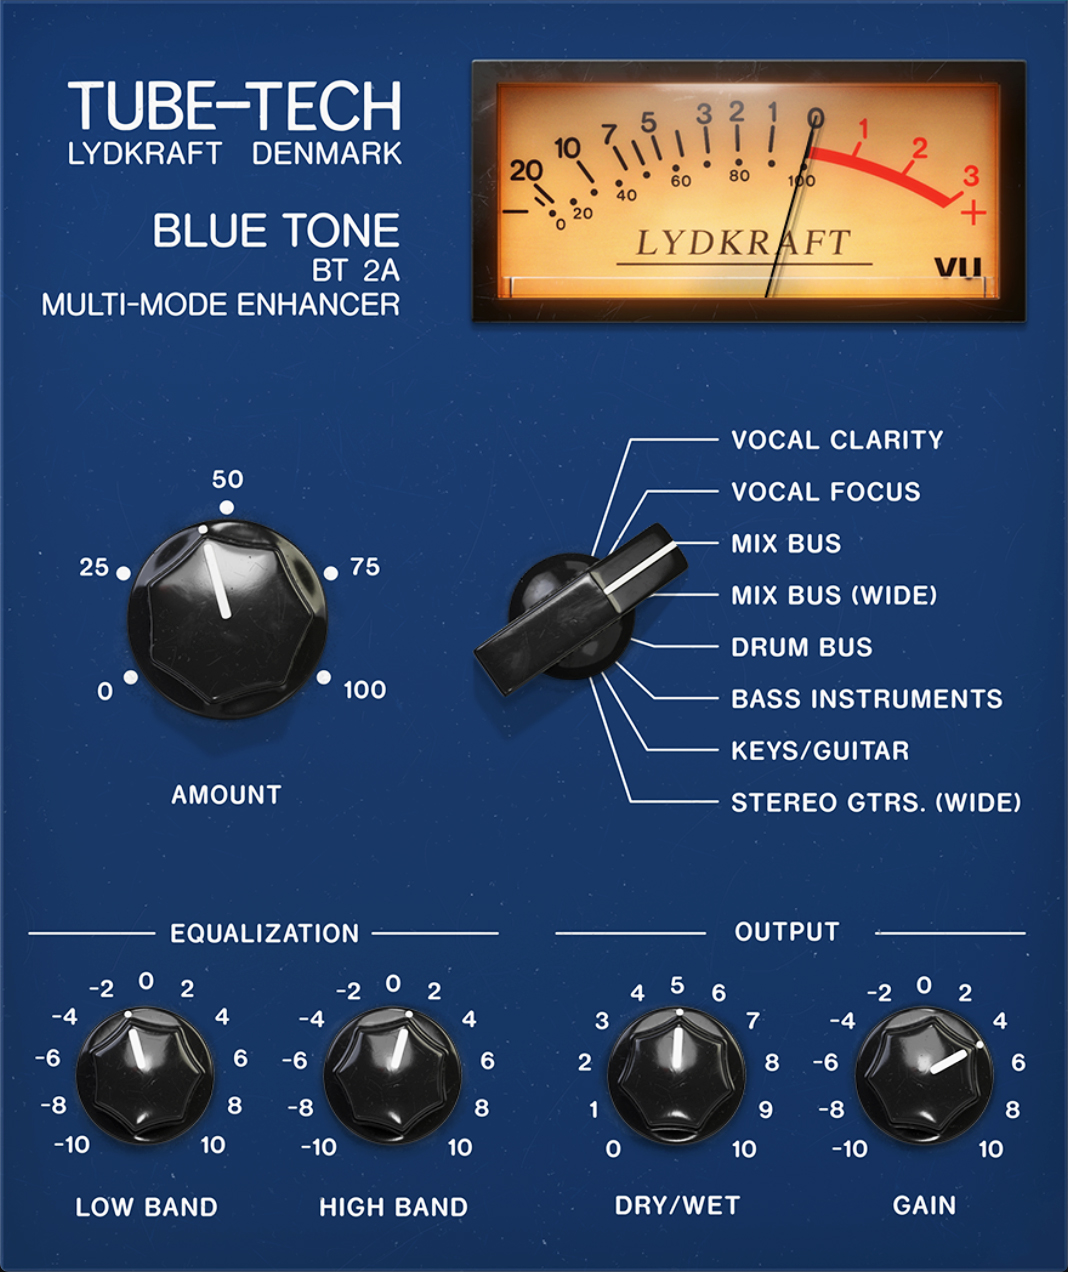 tube-tech-blue-tone-high-res-gui-for-product-page.jpg